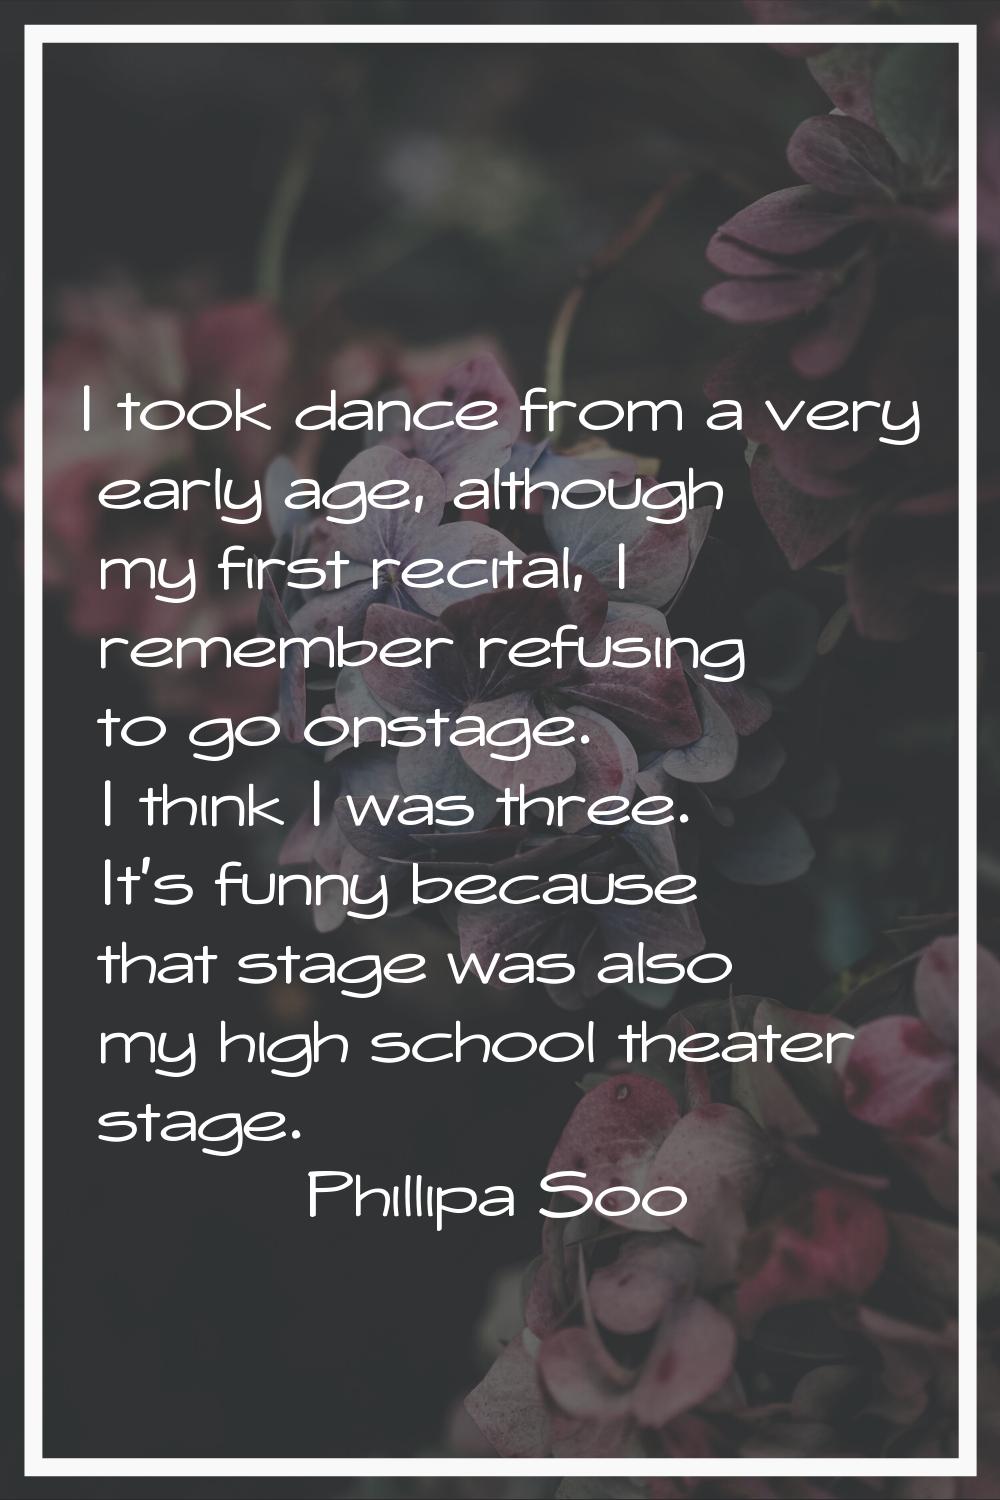 I took dance from a very early age, although my first recital, I remember refusing to go onstage. I